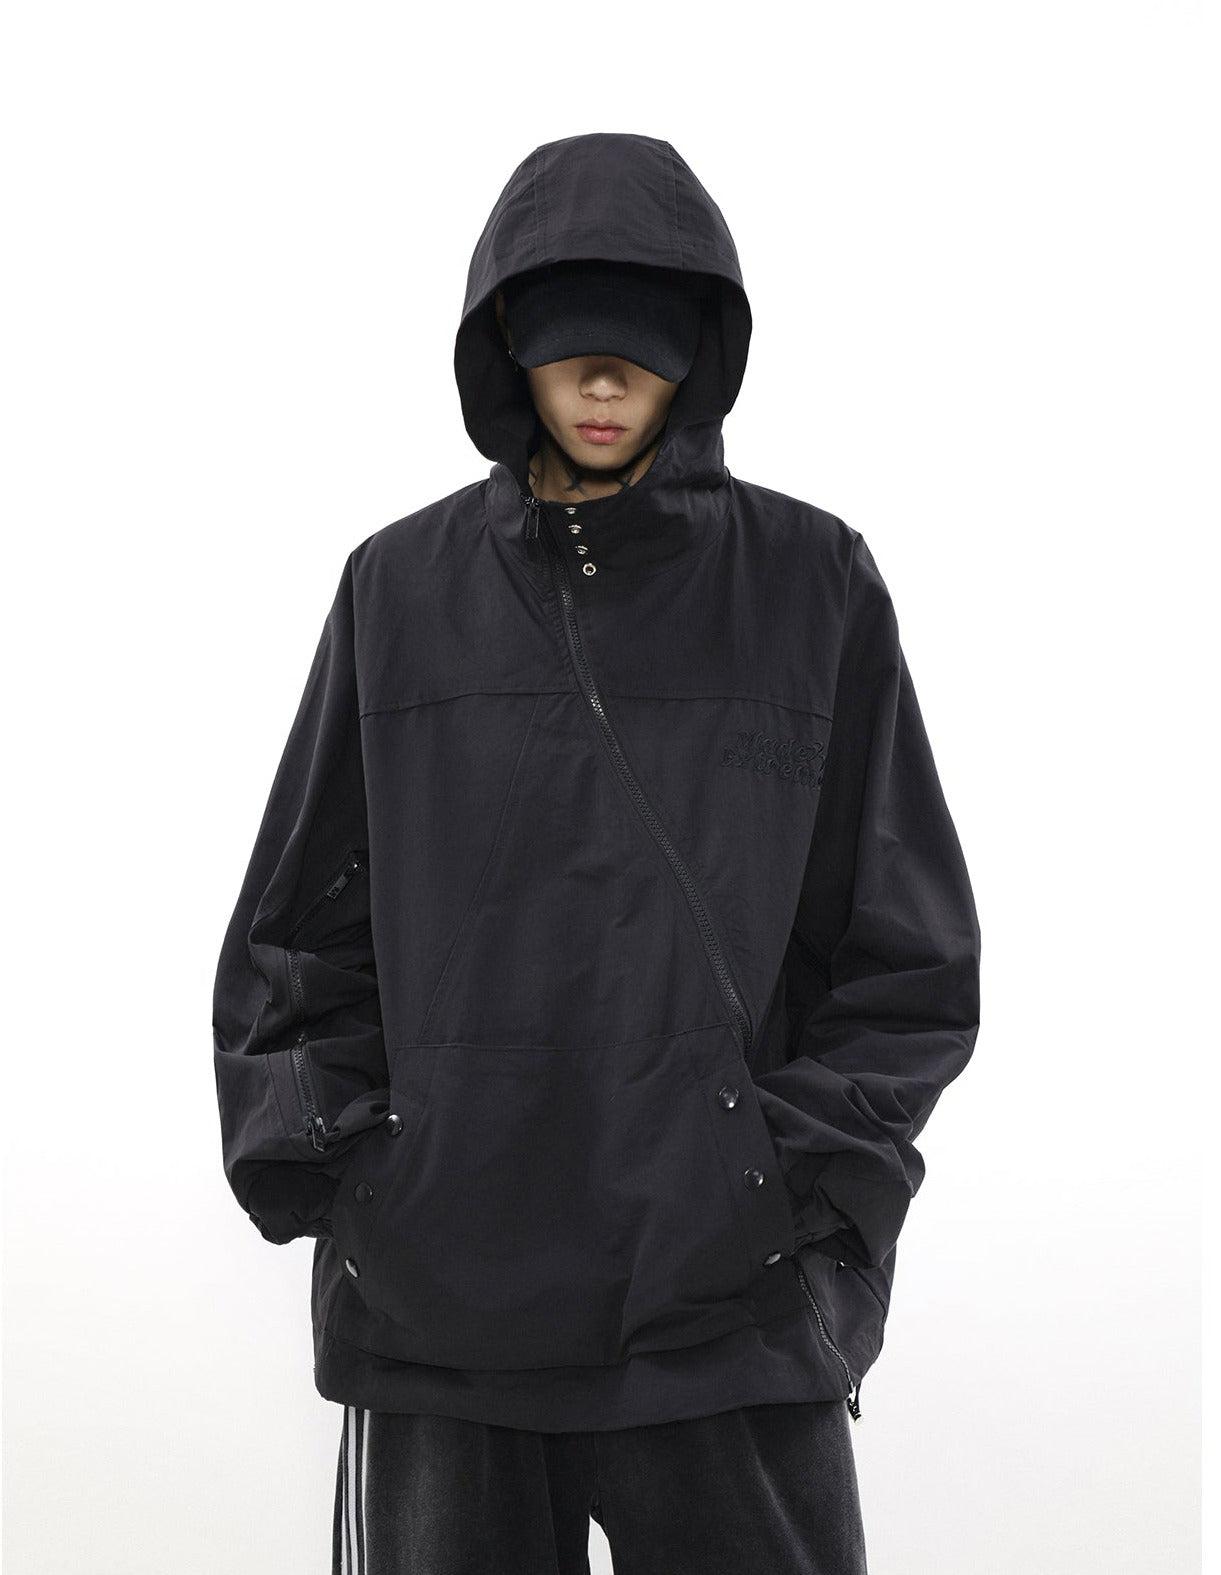 Mr Nearly Solid Asymmetrical Zip-Up Hoodie Korean Street Fashion Hoodie By Mr Nearly Shop Online at OH Vault